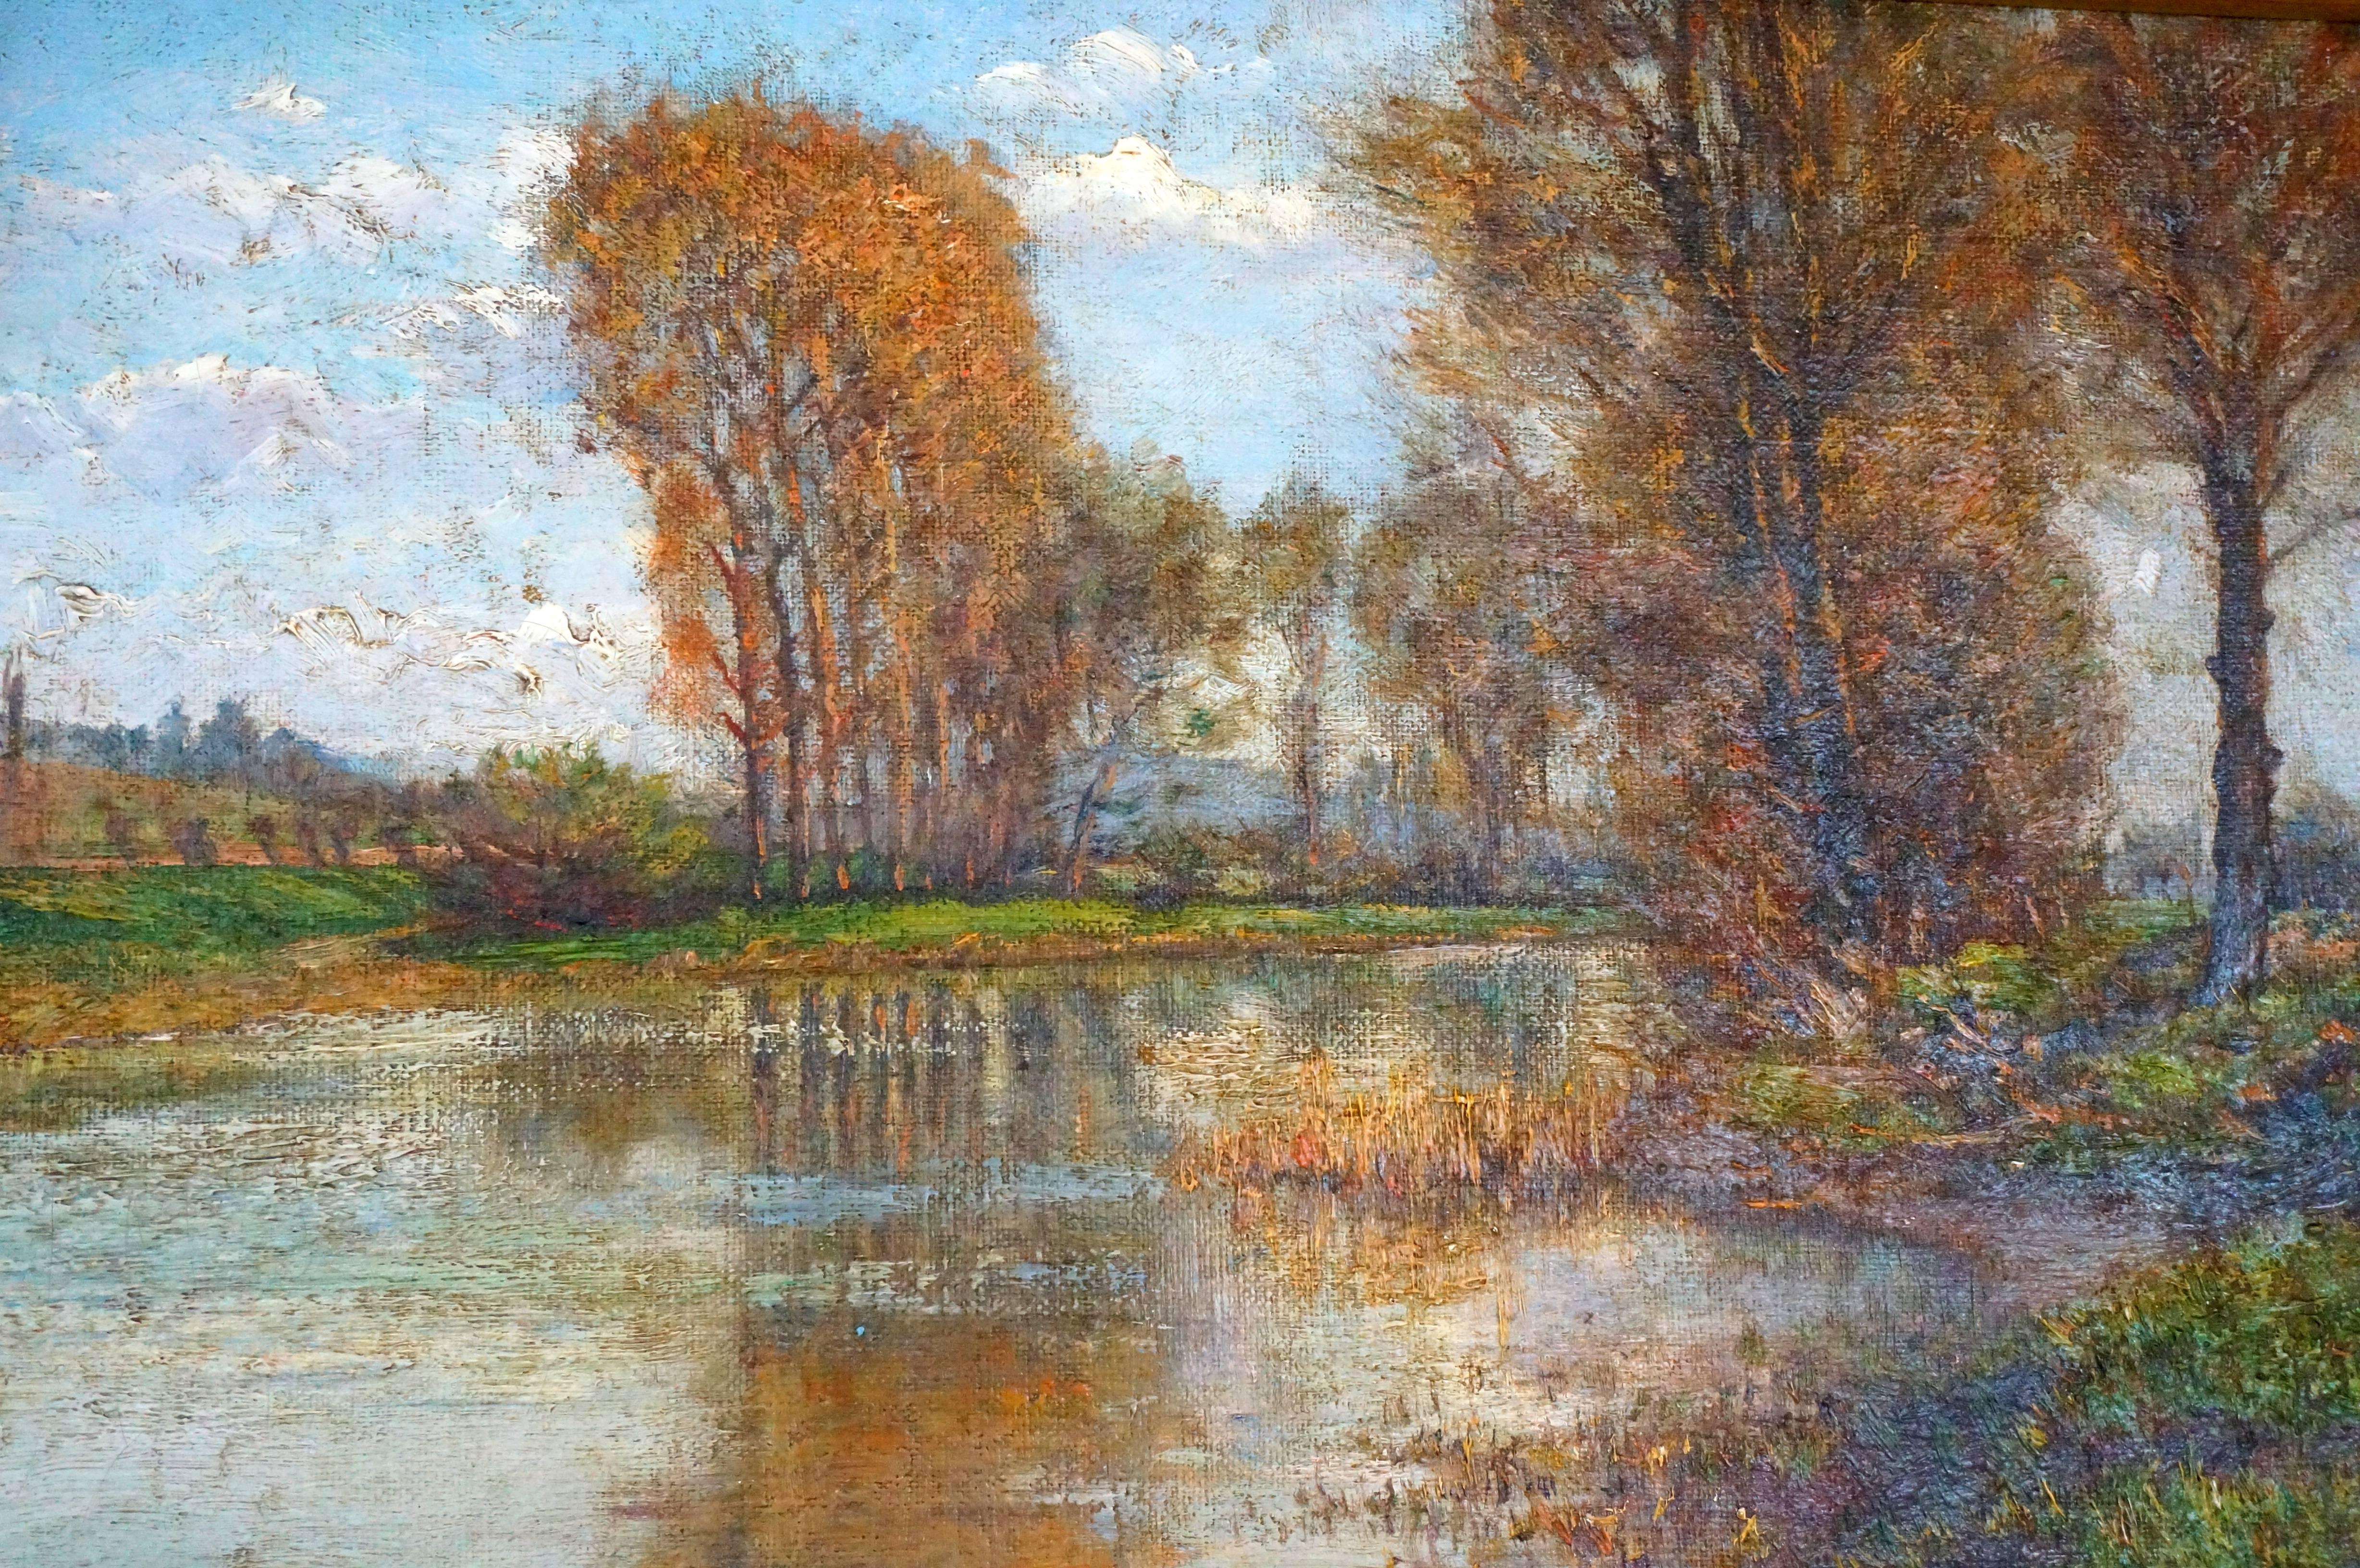 This charming and tranquil oil on canvas painting is by the French painter Edmond Louyot and dates from 1984. The painting is titled 